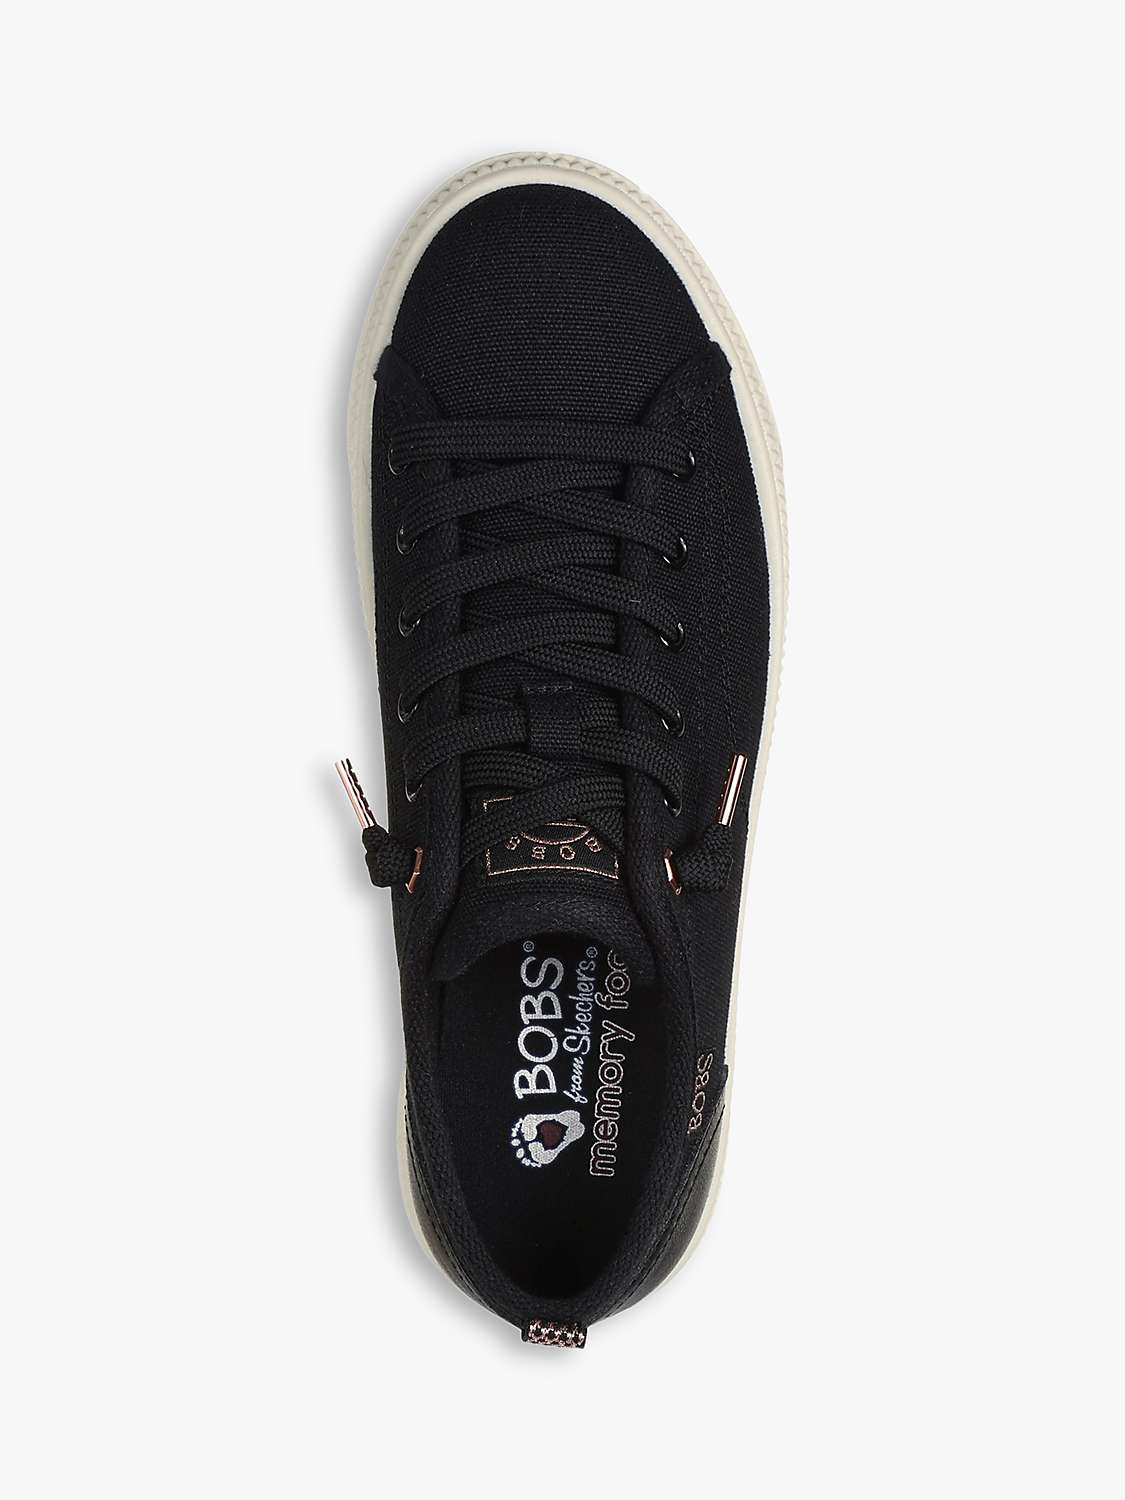 Buy Skechers BOBS Copa Chunky Trainers Online at johnlewis.com